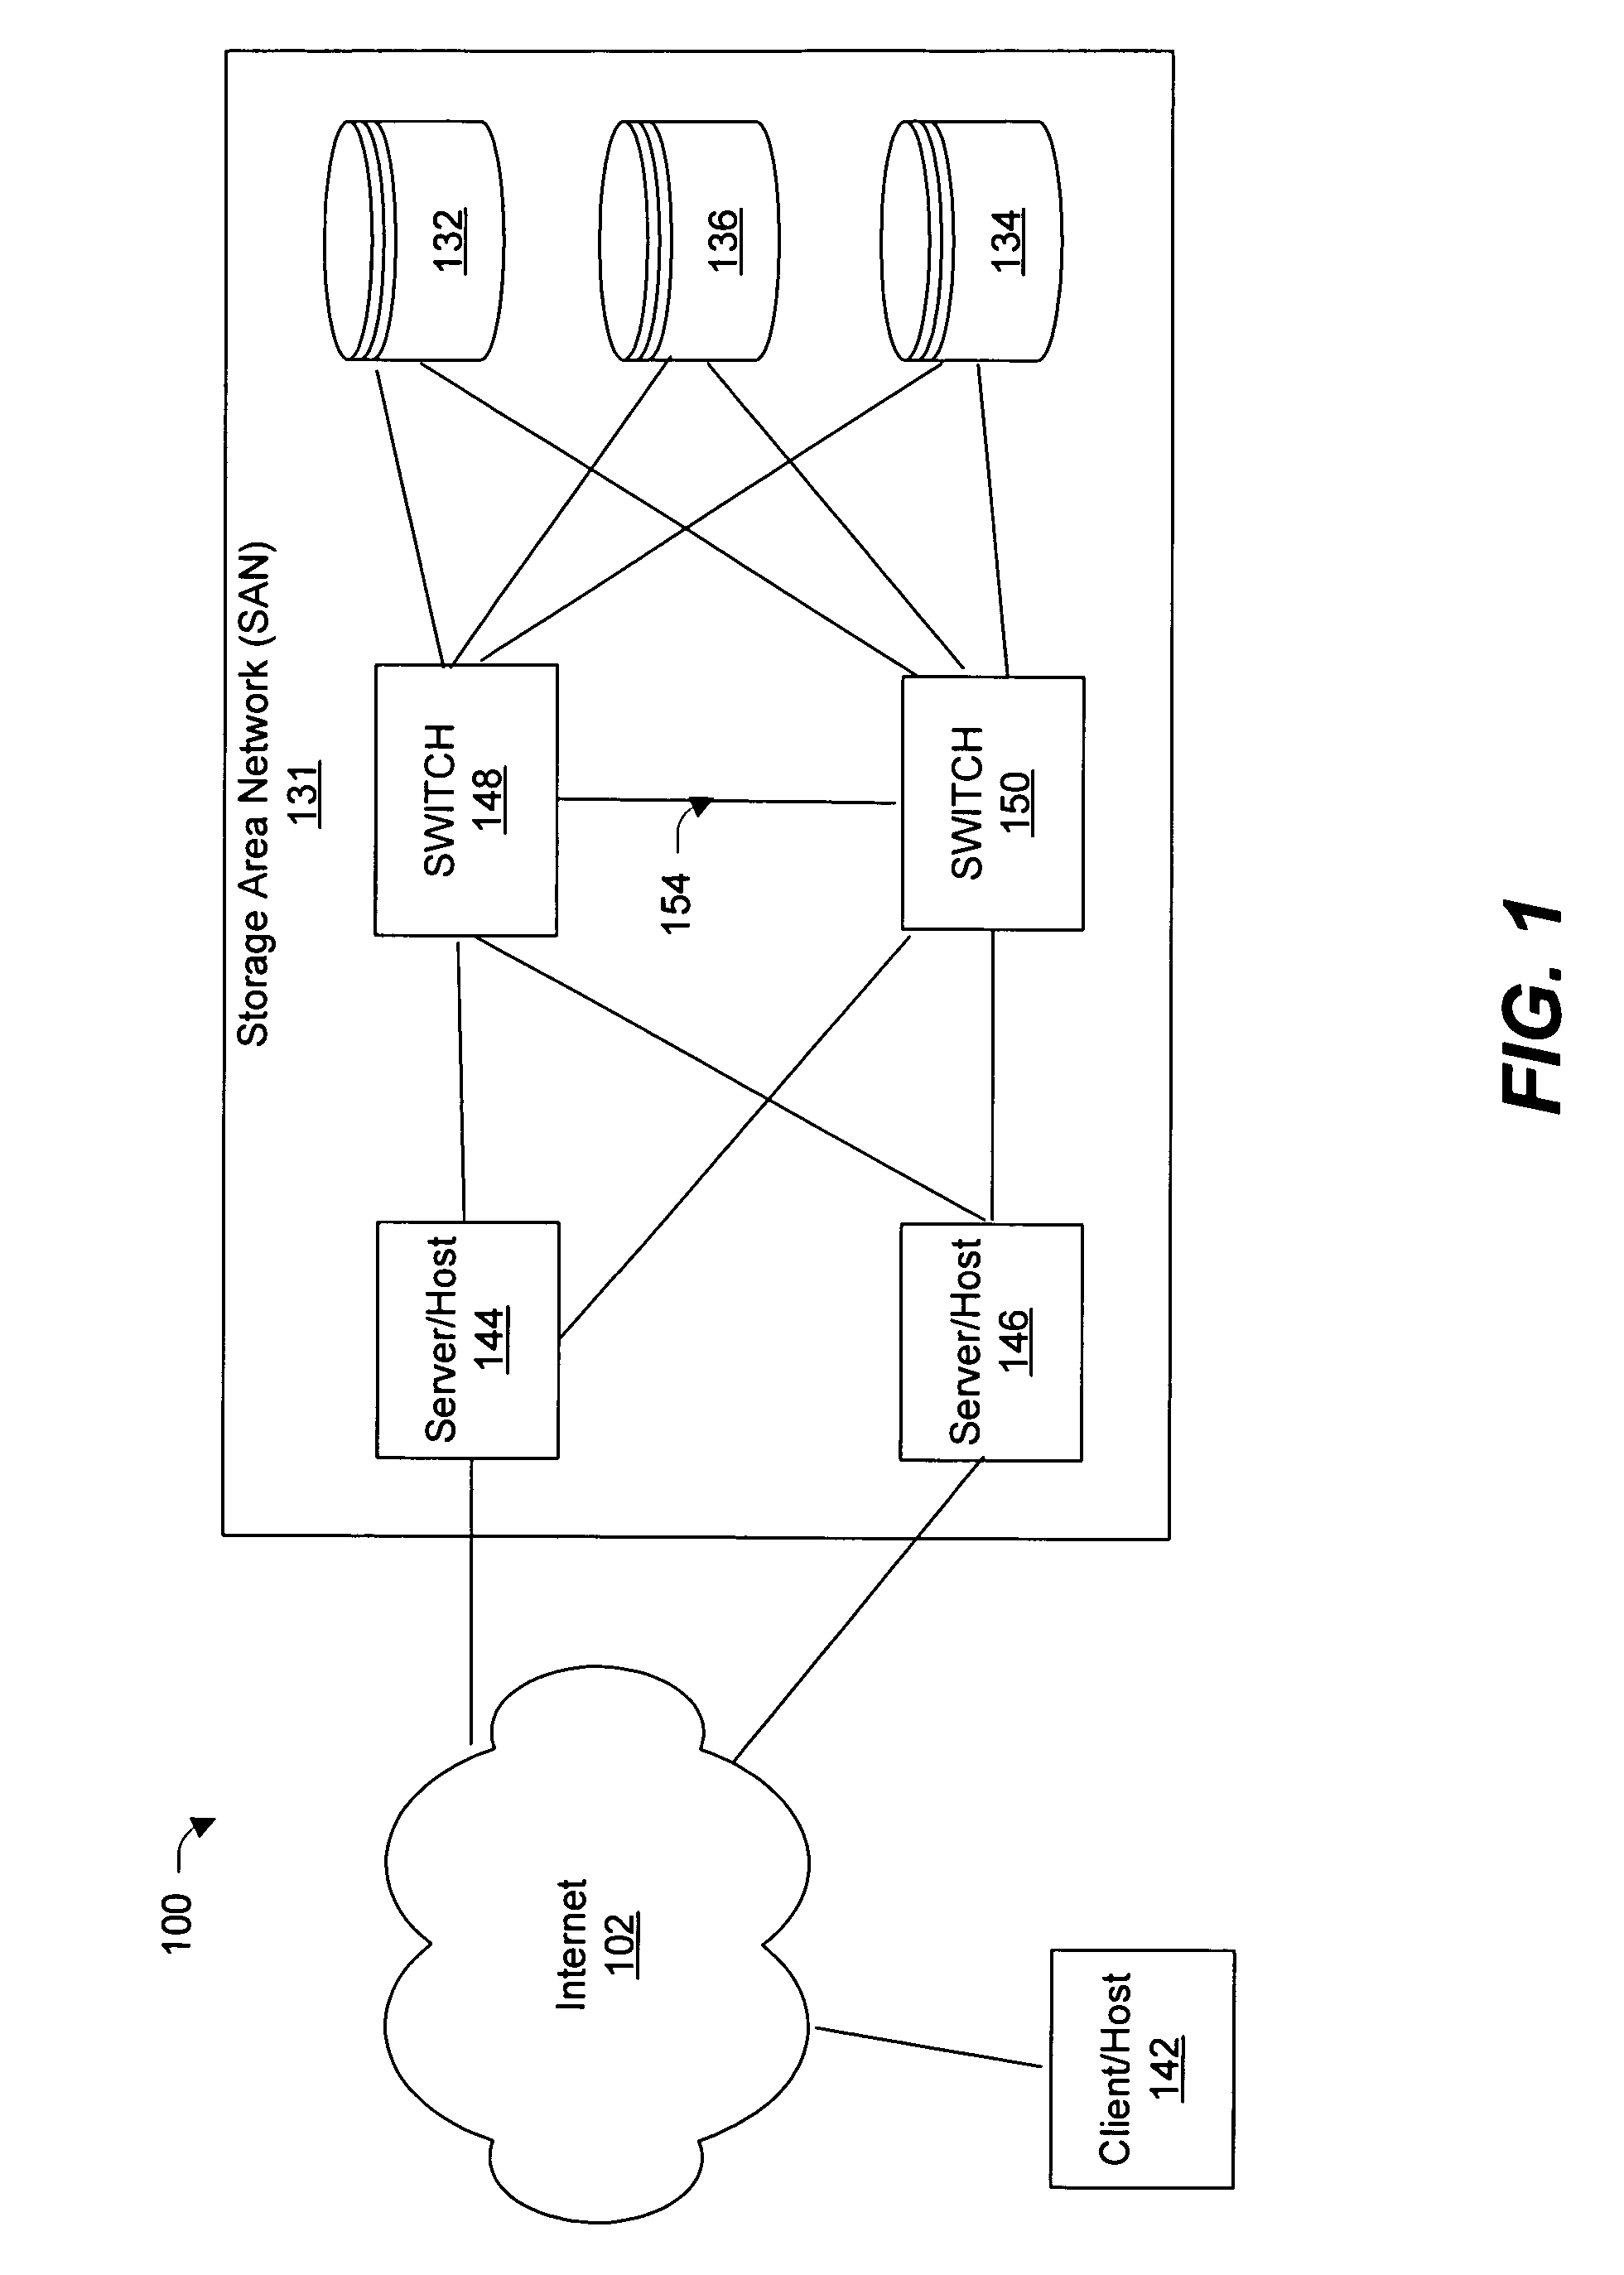 Apparatus and methods for controlling a data tapping session in a storage area network